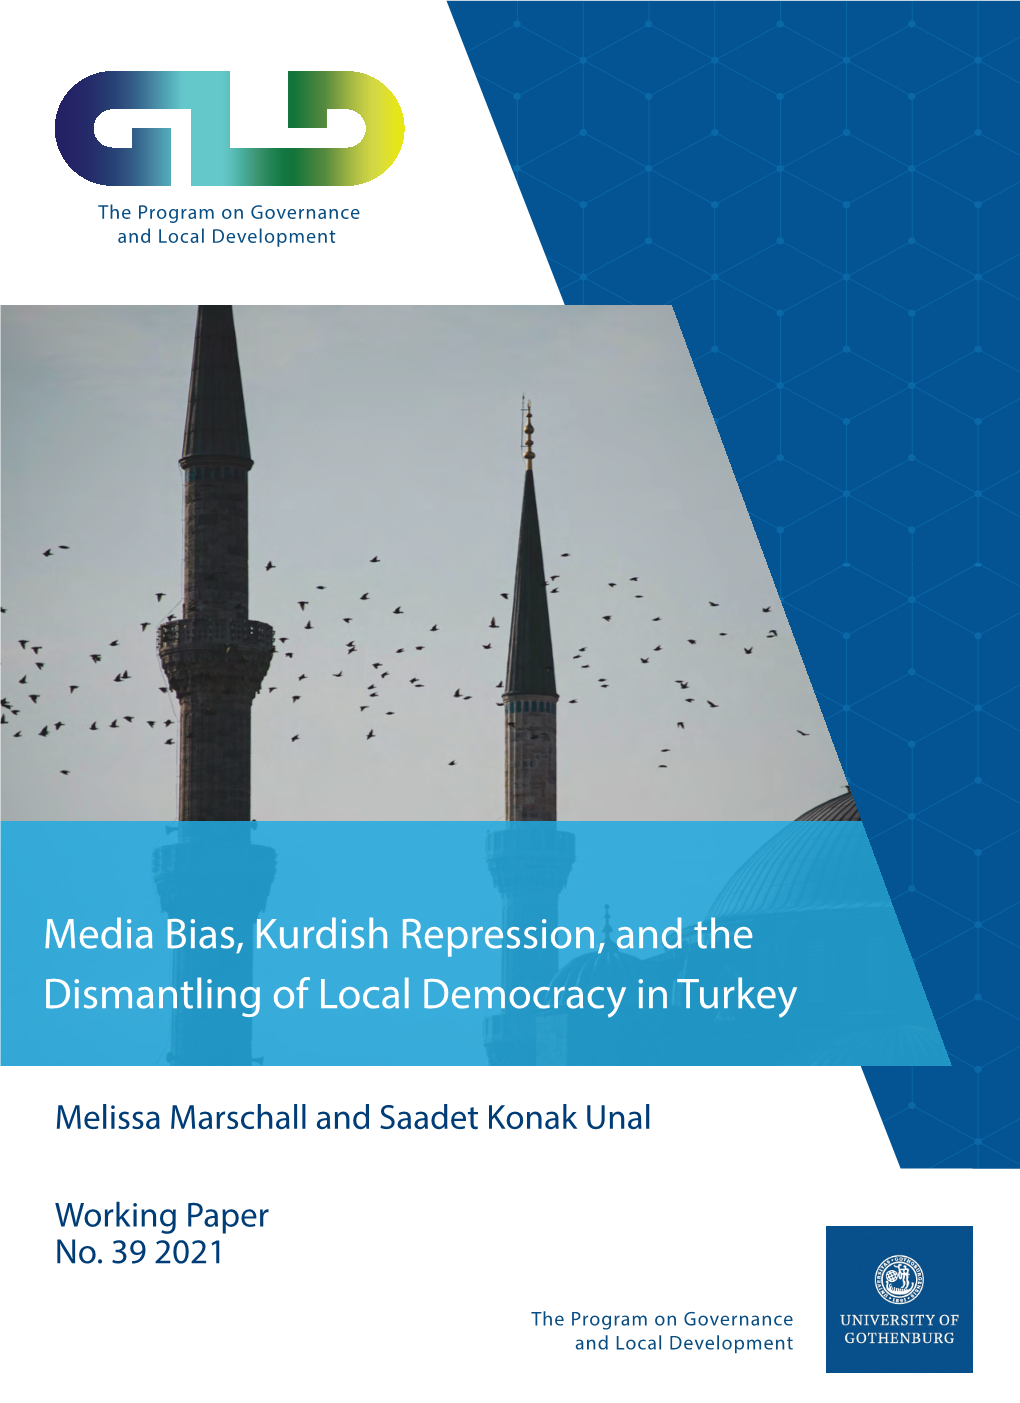 Media Bias, Kurdish Repression, and the Dismantling of Local Democracy in Turkey